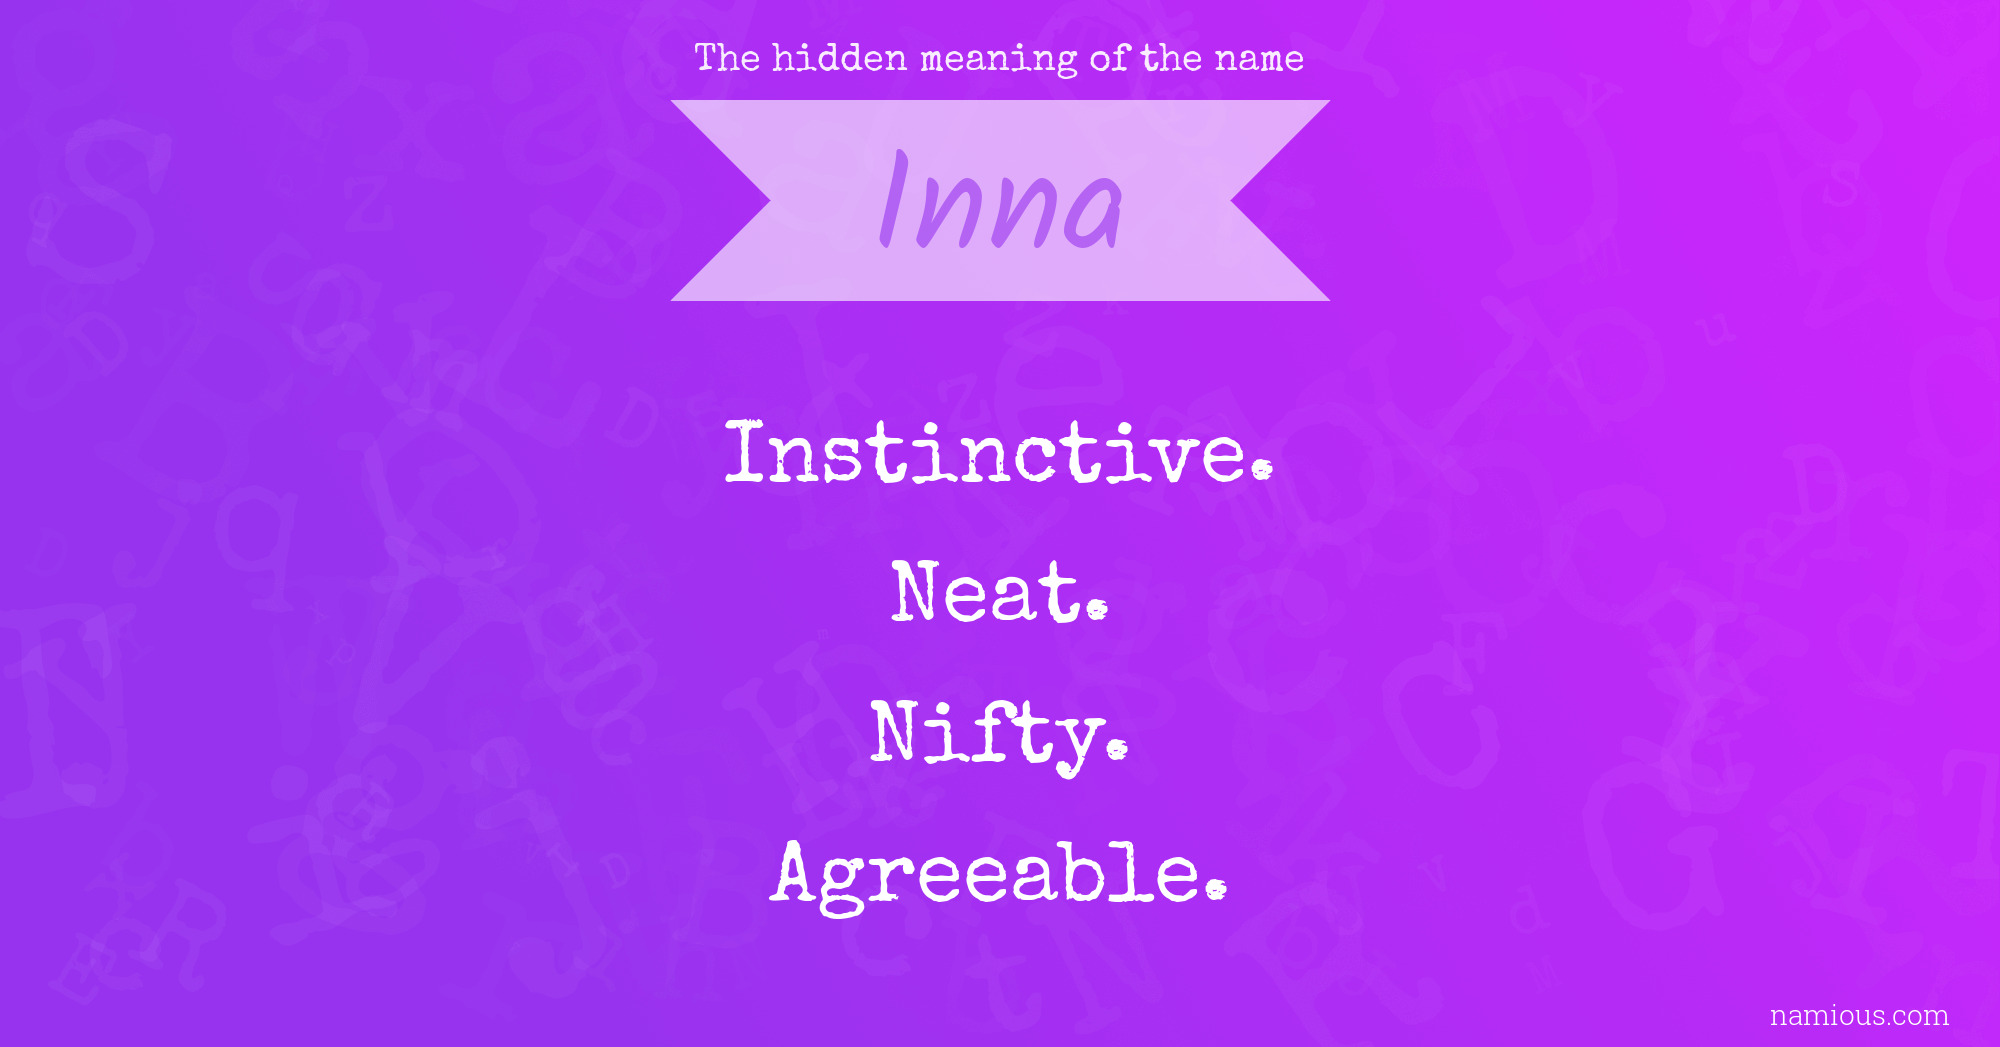 The hidden meaning of the name Inna